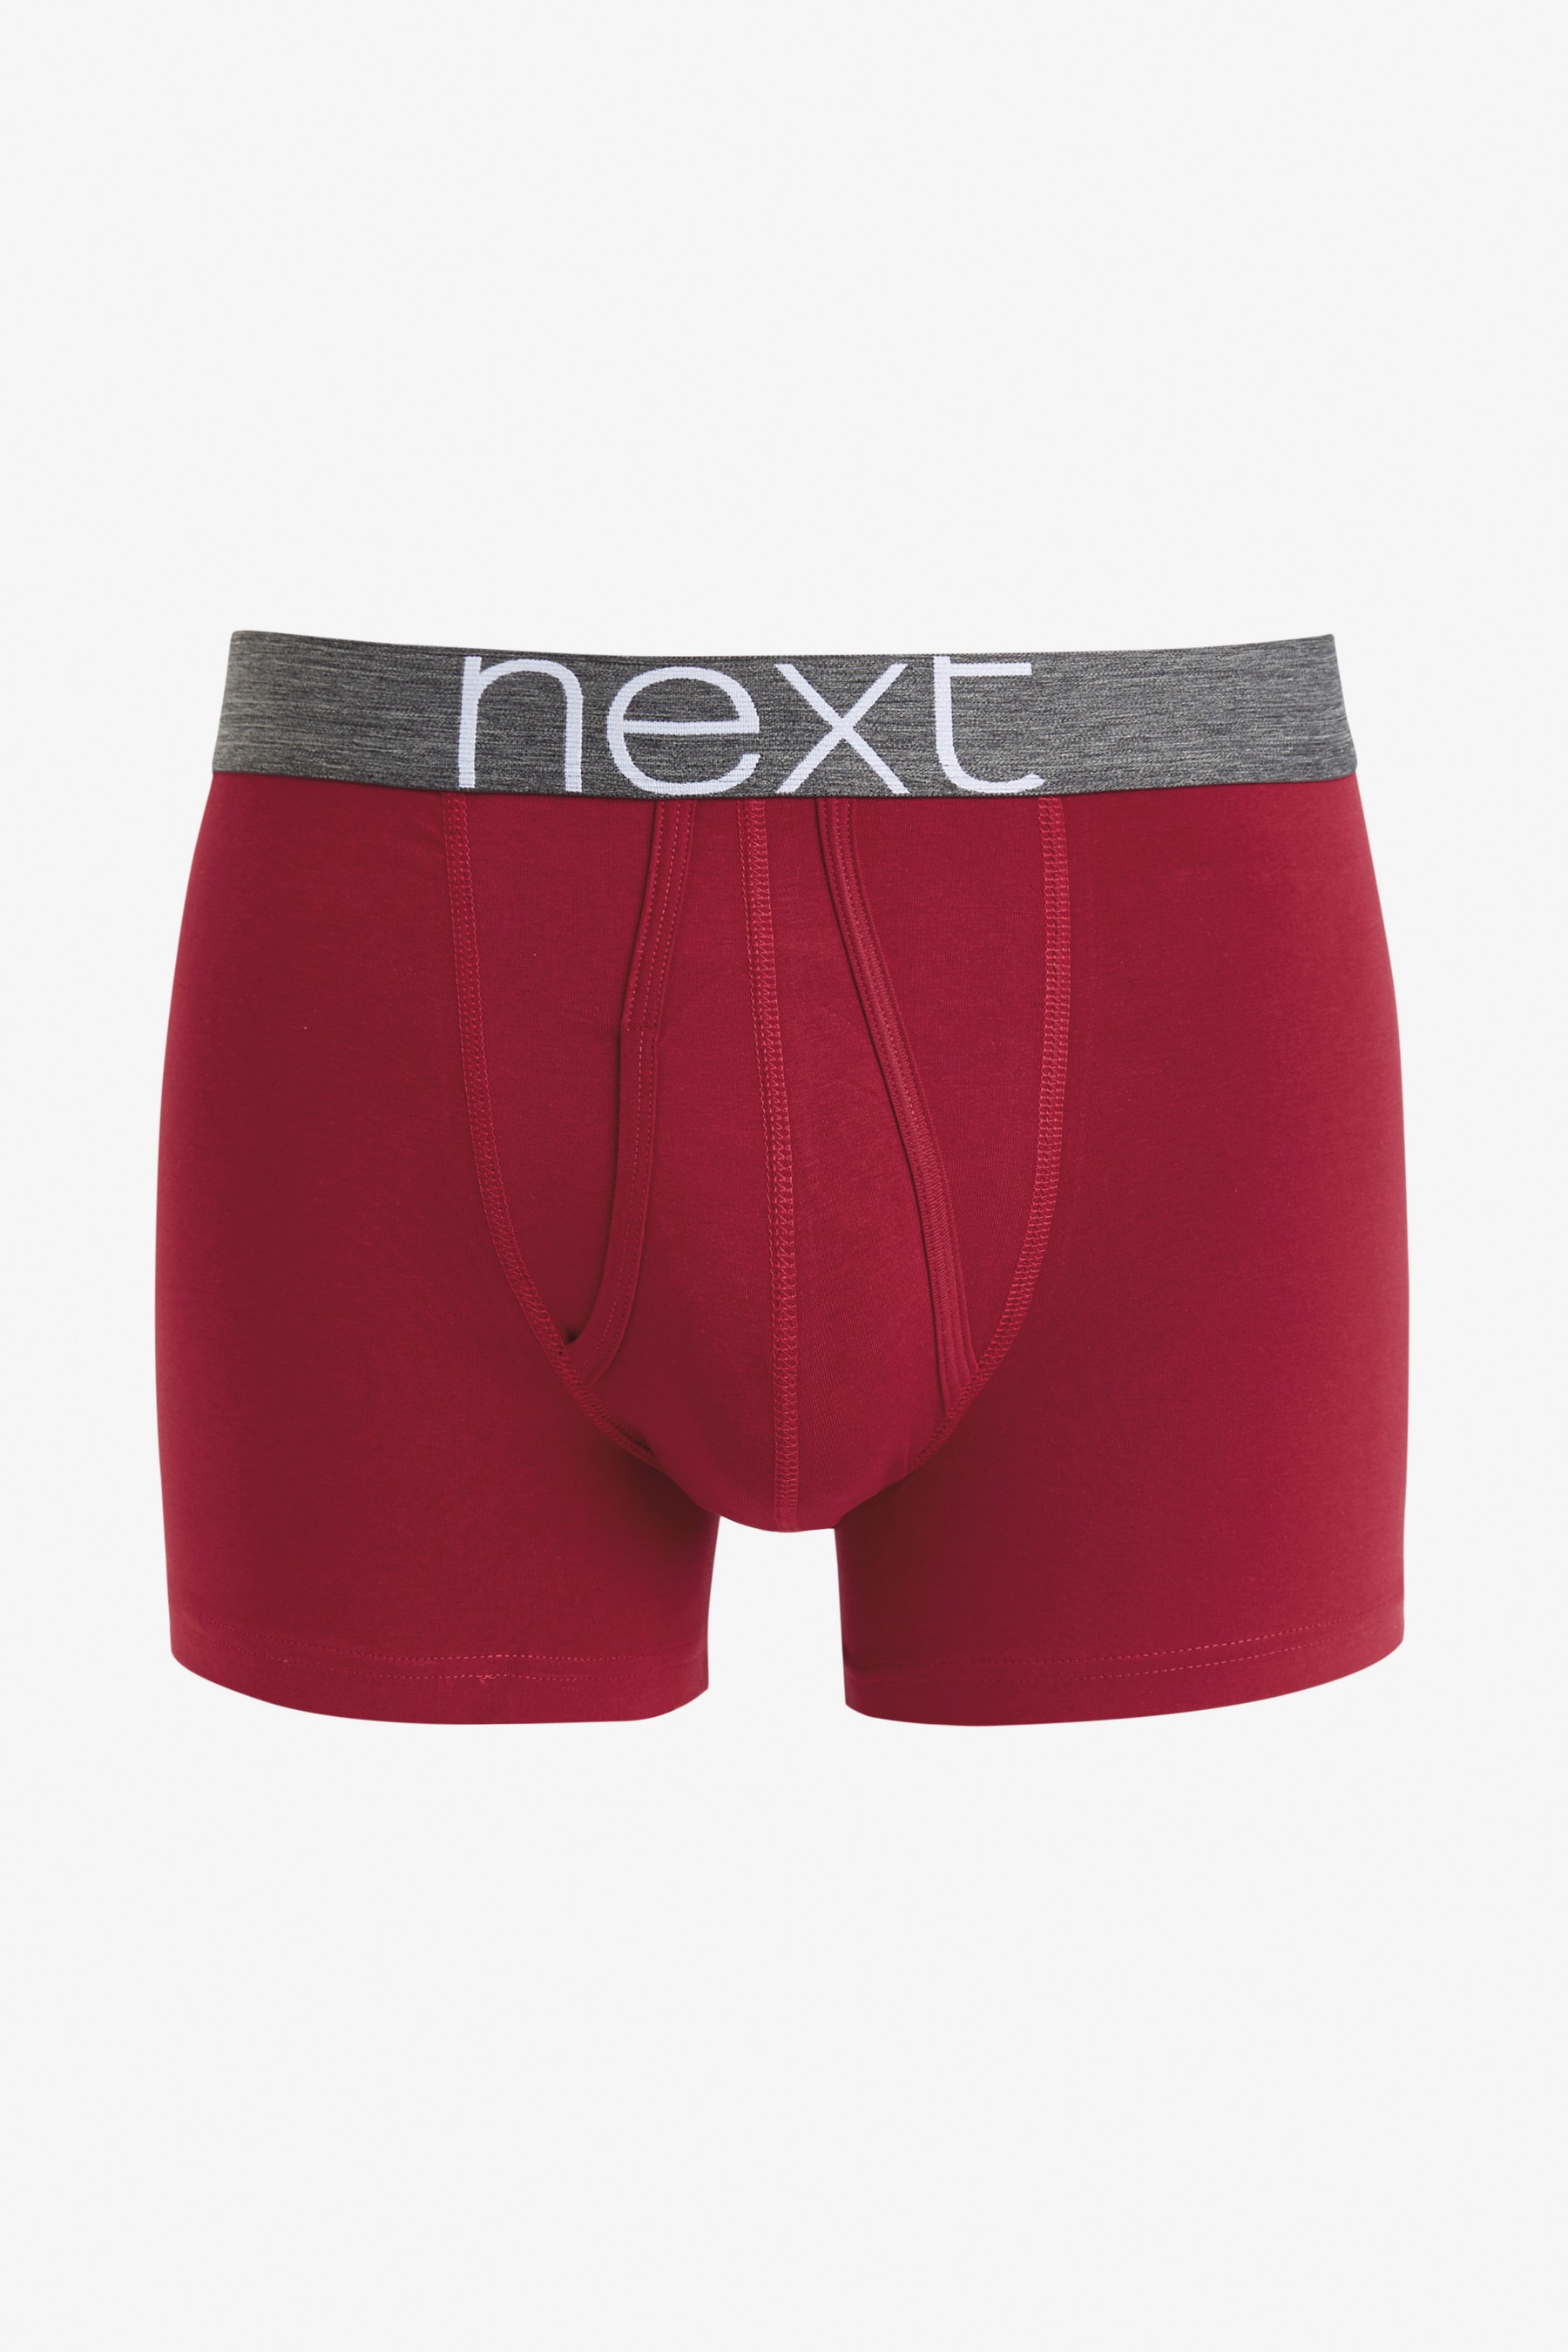 A-Front Boxers 10 Pack